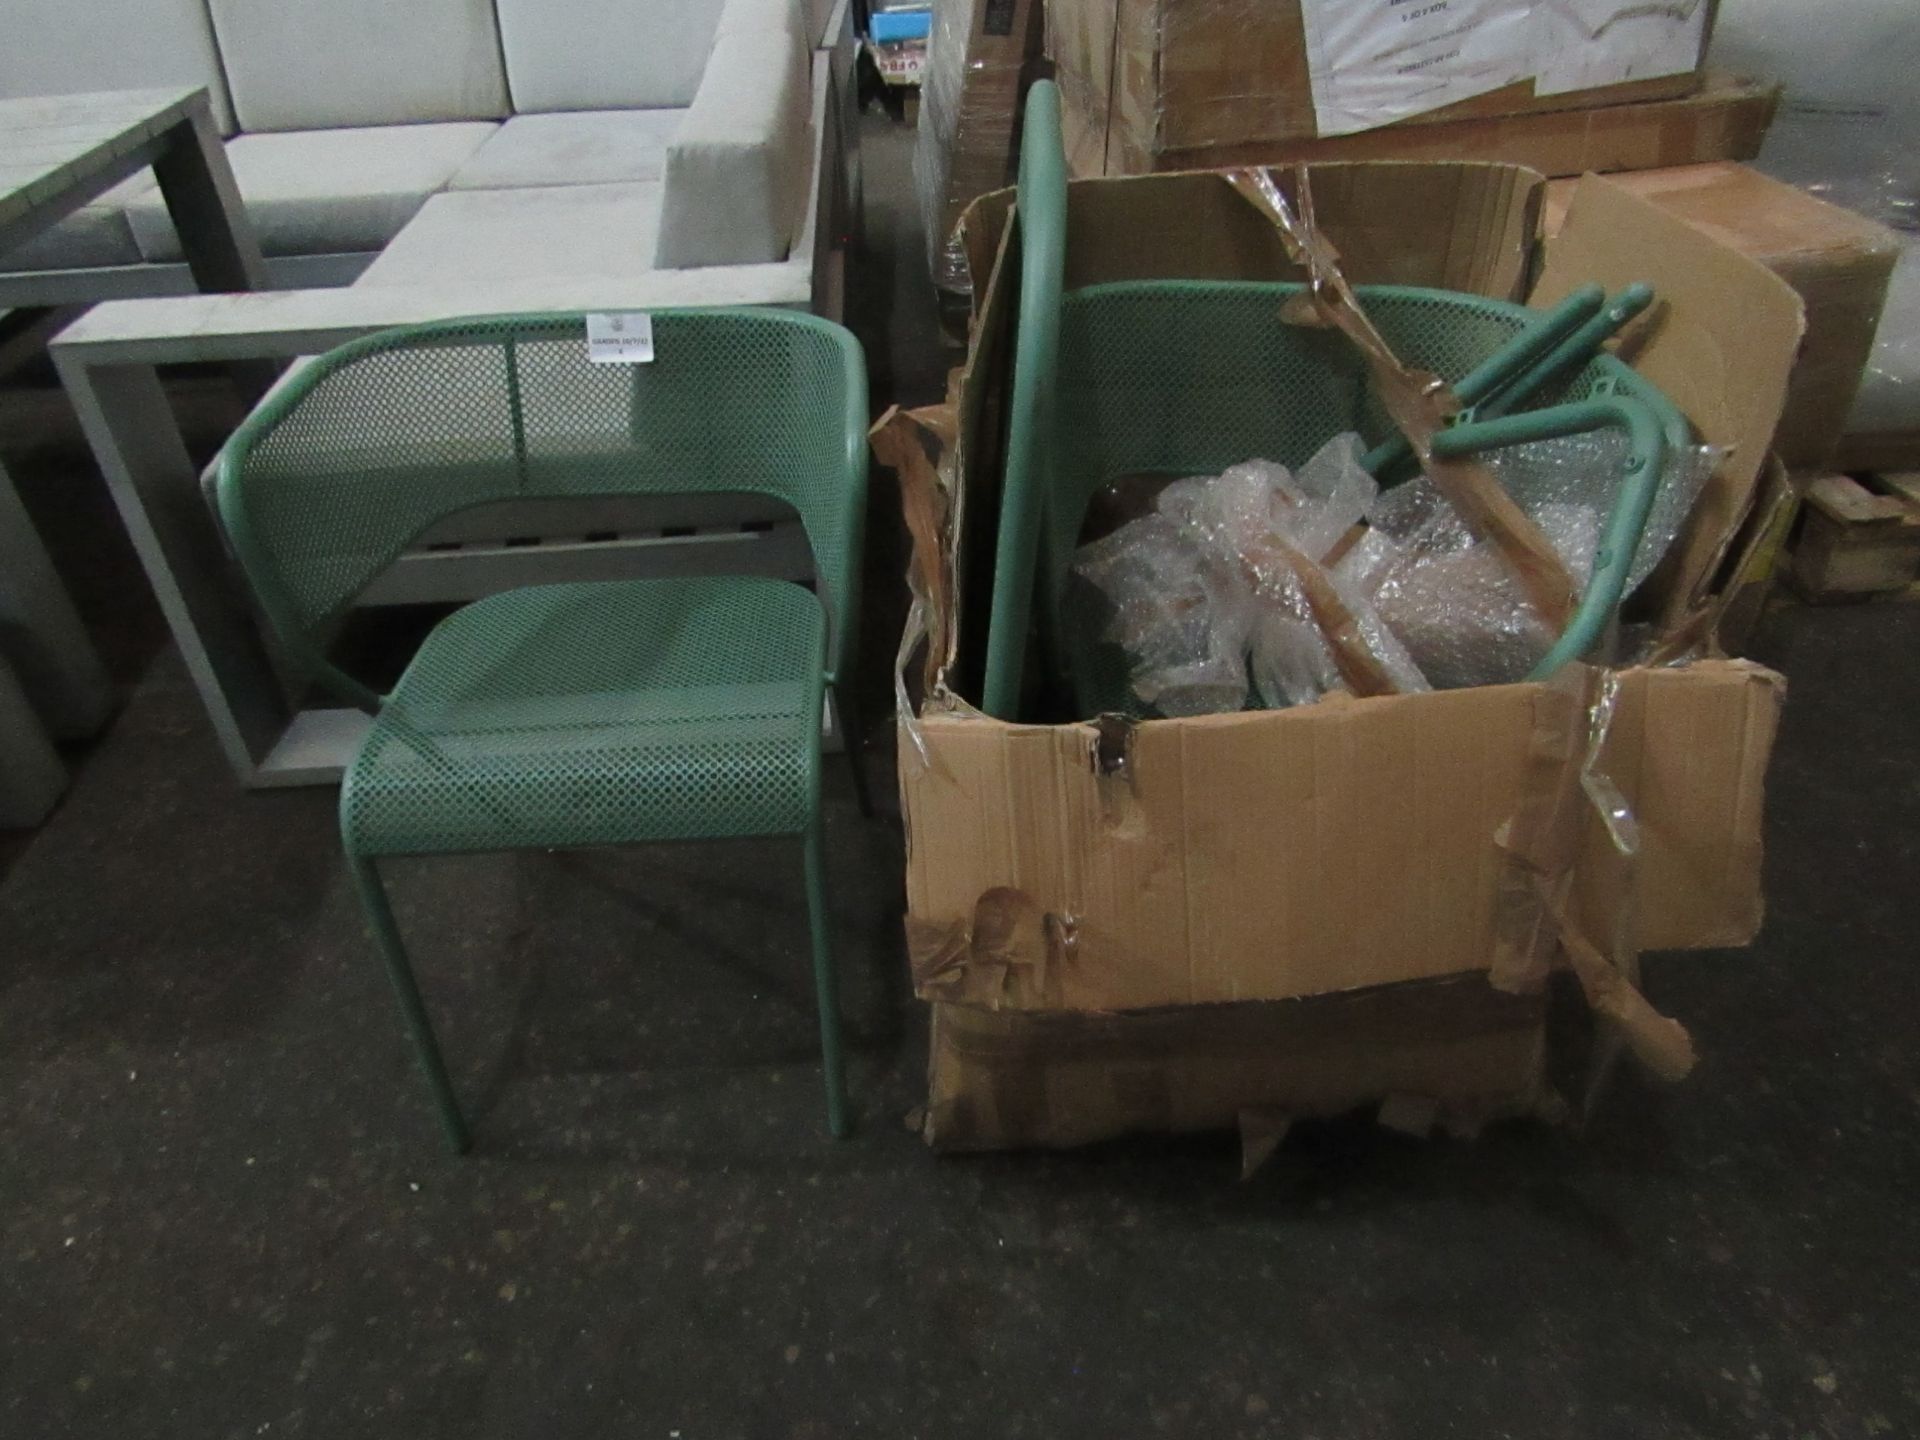 VAT 1x Set of 2 Cox & Cox Outdoor Chairs - Green - Good Condition & Boxed